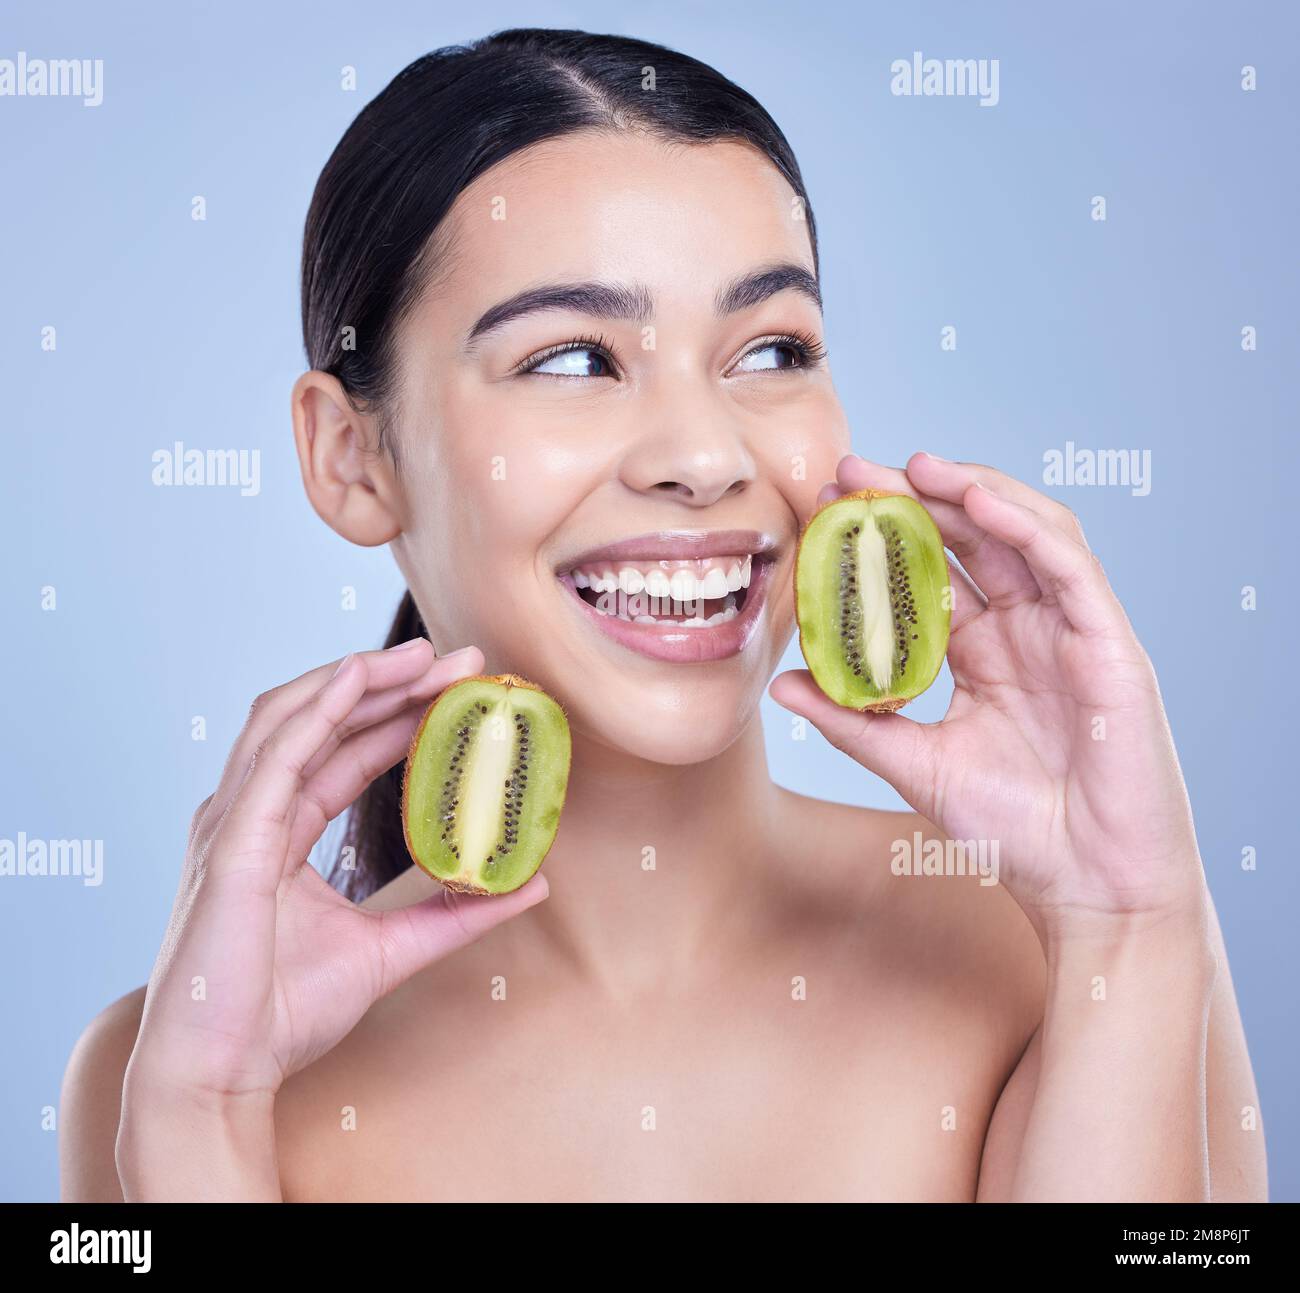 A happy smiling mixed race woman holding a kiwi fruit. Hispanic model promoting the skin benefits of a healthy diet against a blue copyspace Stock Photo